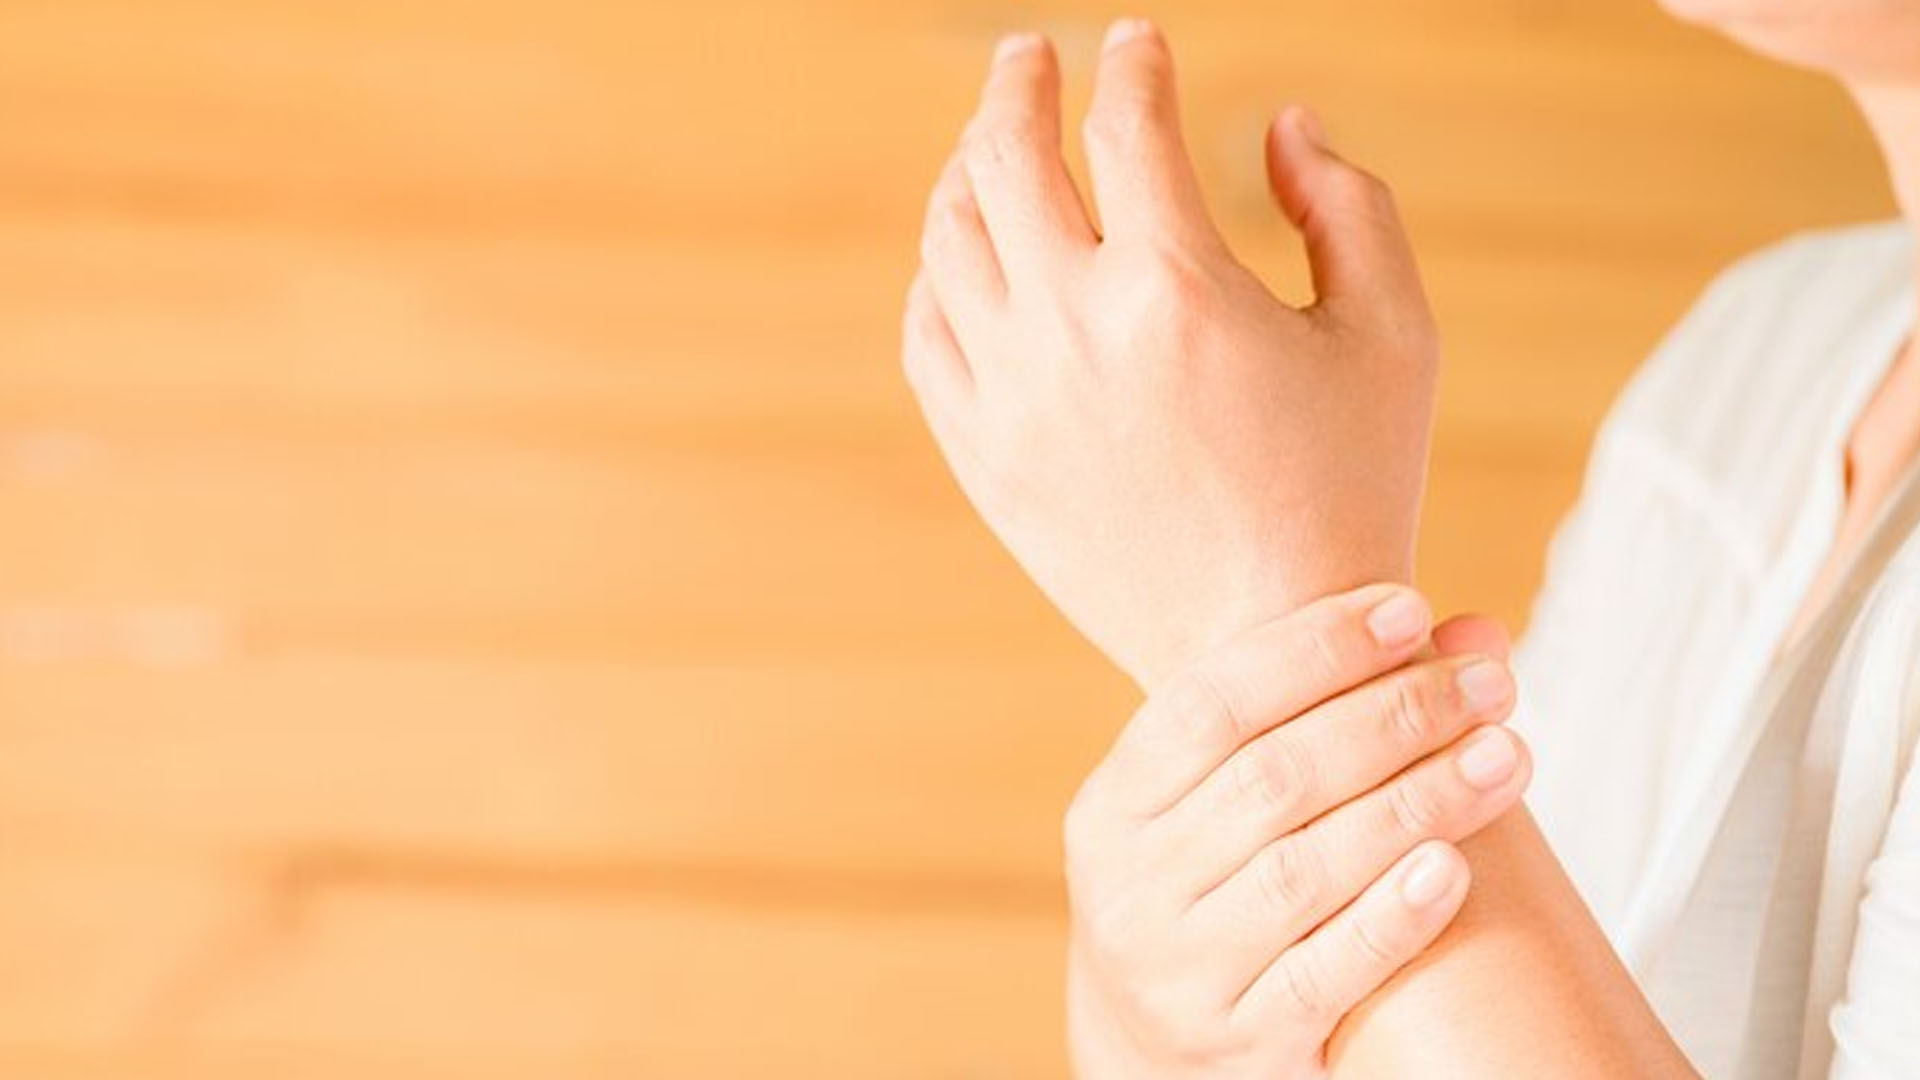 What are the Home Remedies for Wrist Pain?